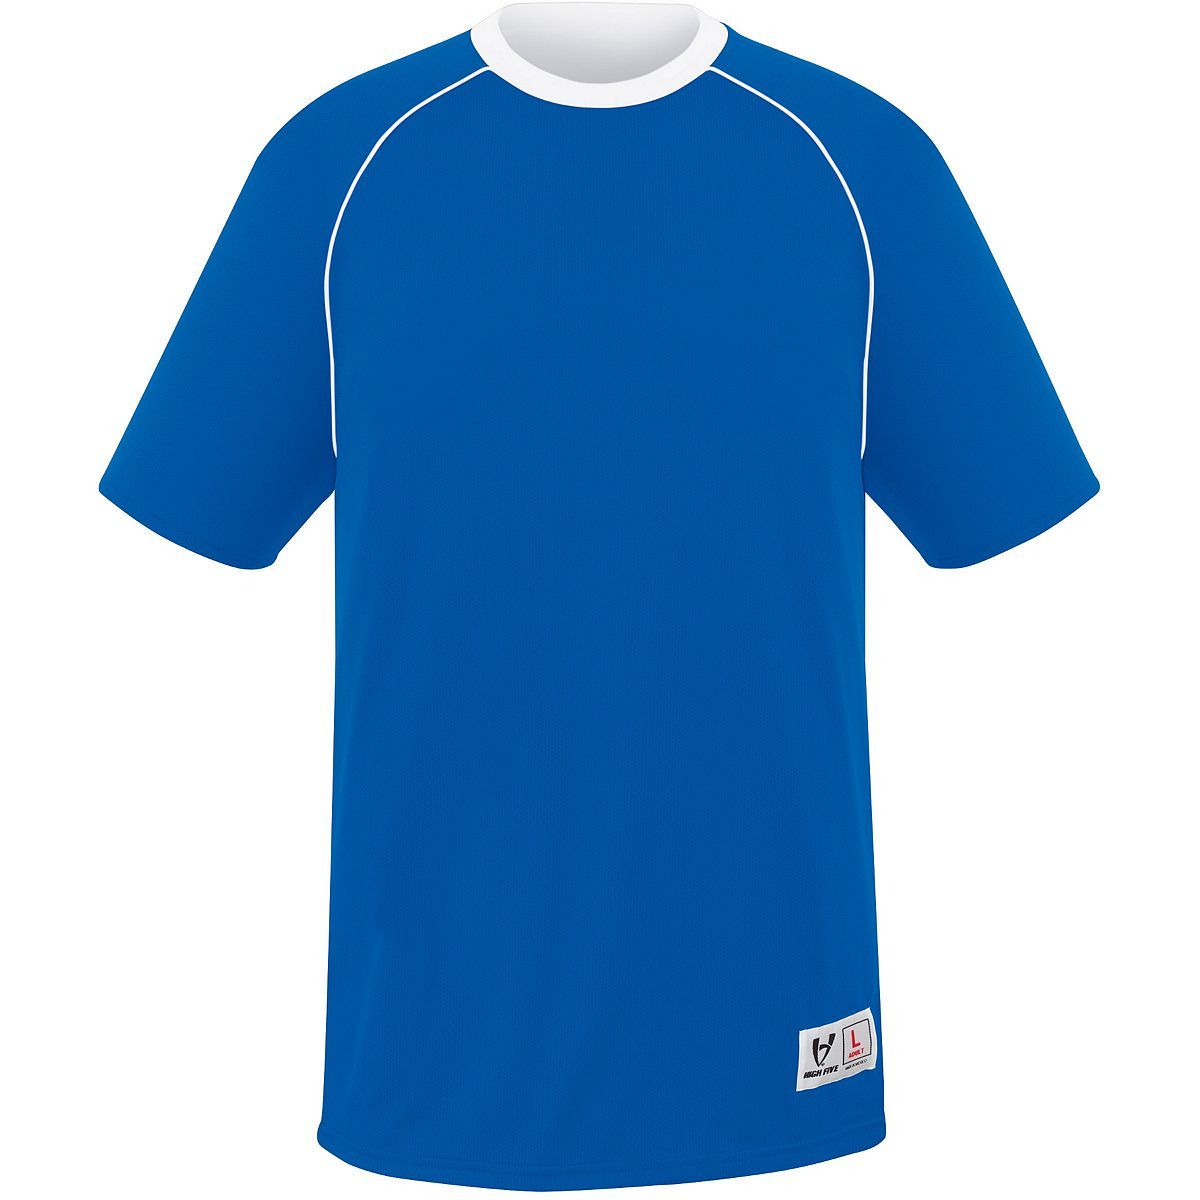 High 5 Conversion Reversible Jersey in Royal/White  -Part of the Adult, Adult-Jersey, High5-Products, Soccer, Shirts, All-Sports-1 product lines at KanaleyCreations.com